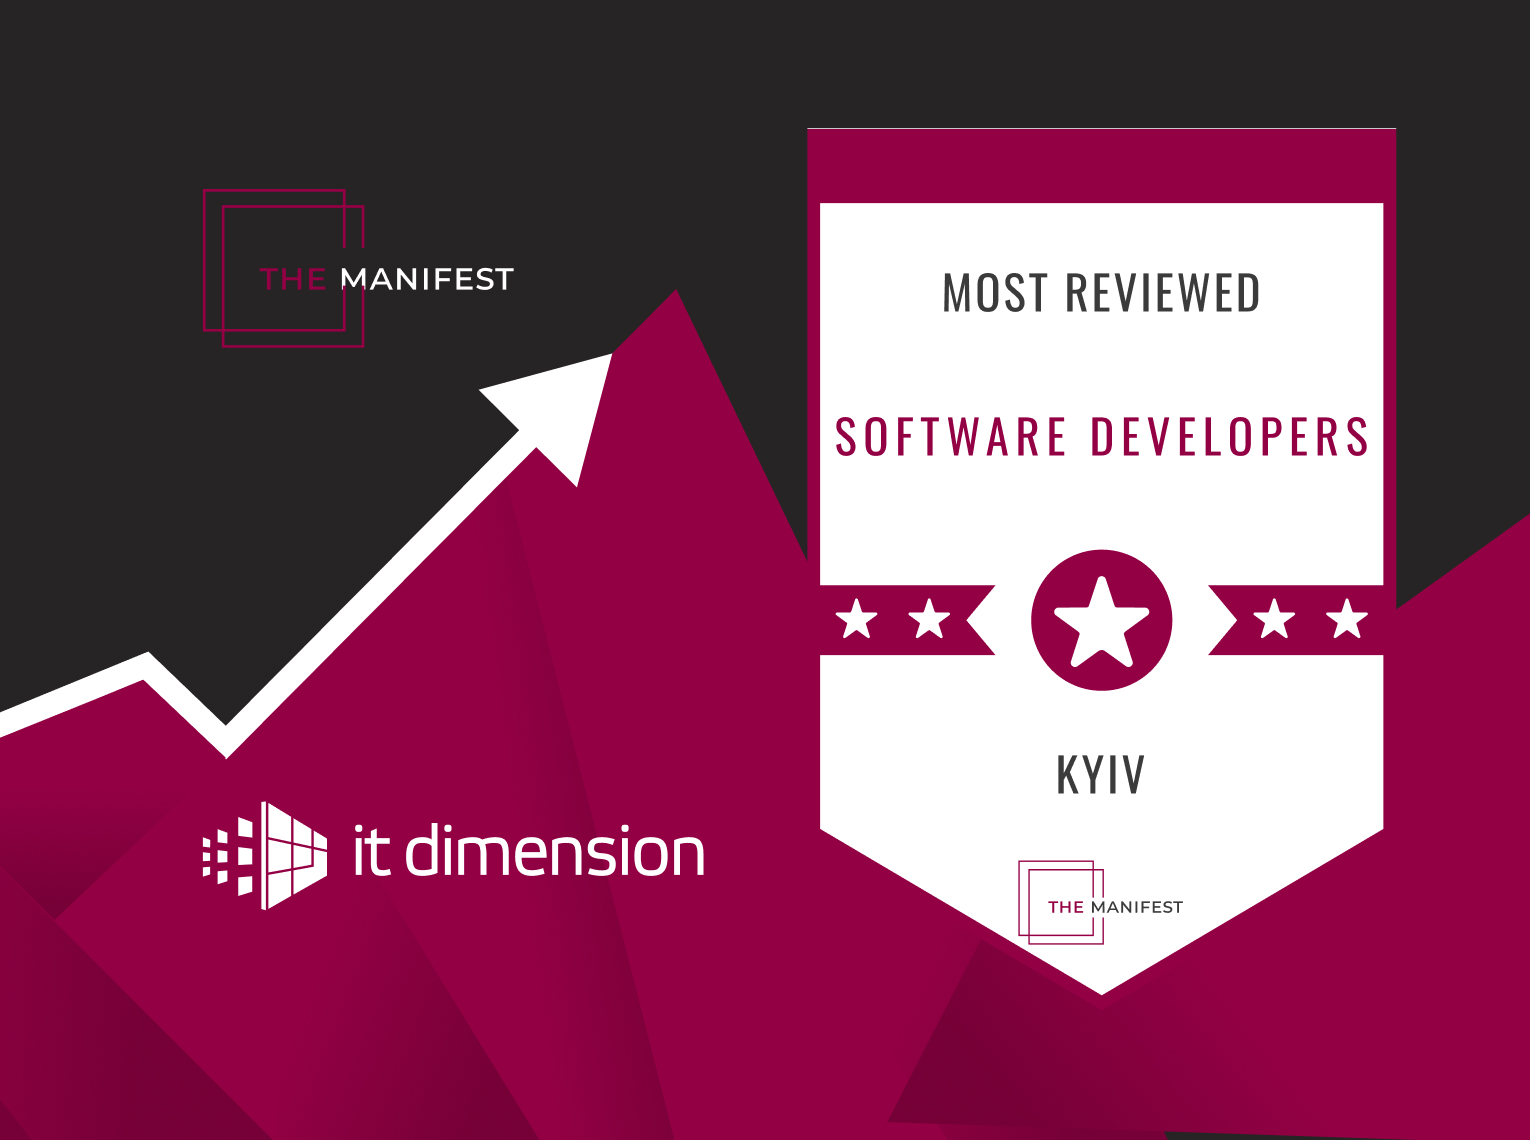 The Manifest Names IT-Dimension as one of the Most Reviewed Software Developers in Ukraine